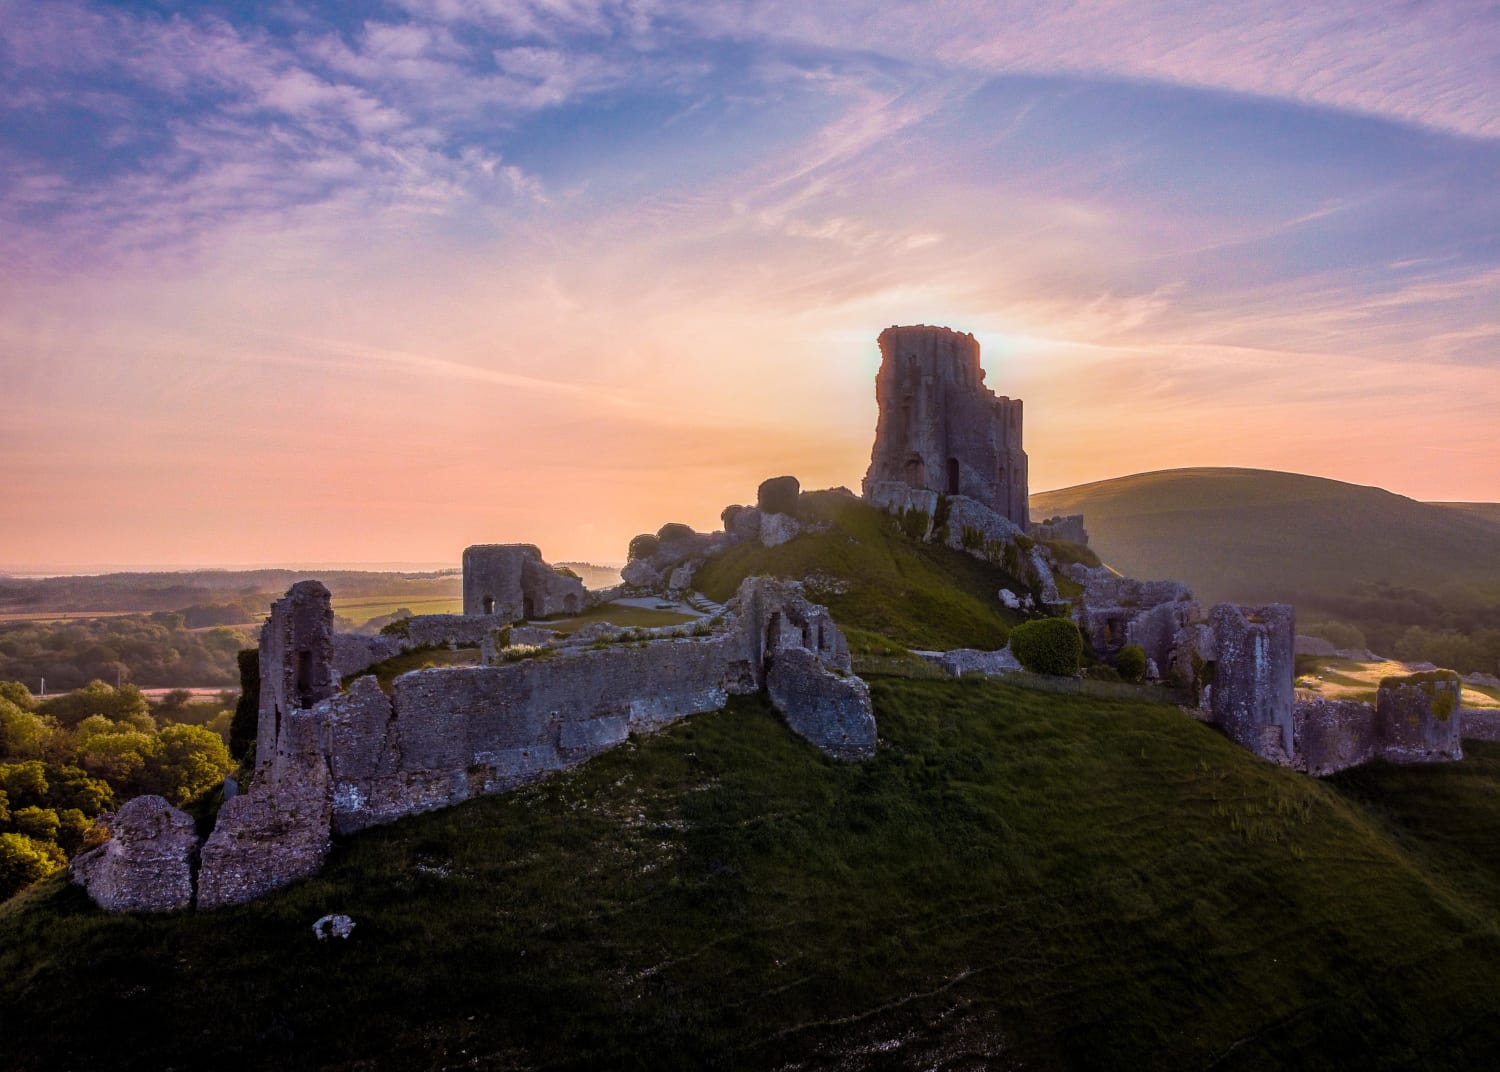 A drone shot of Corfe Castle soon after sunrise. The castle was built in the 2nd half of the 11th Century and is located in Dorset near the South Coast of England